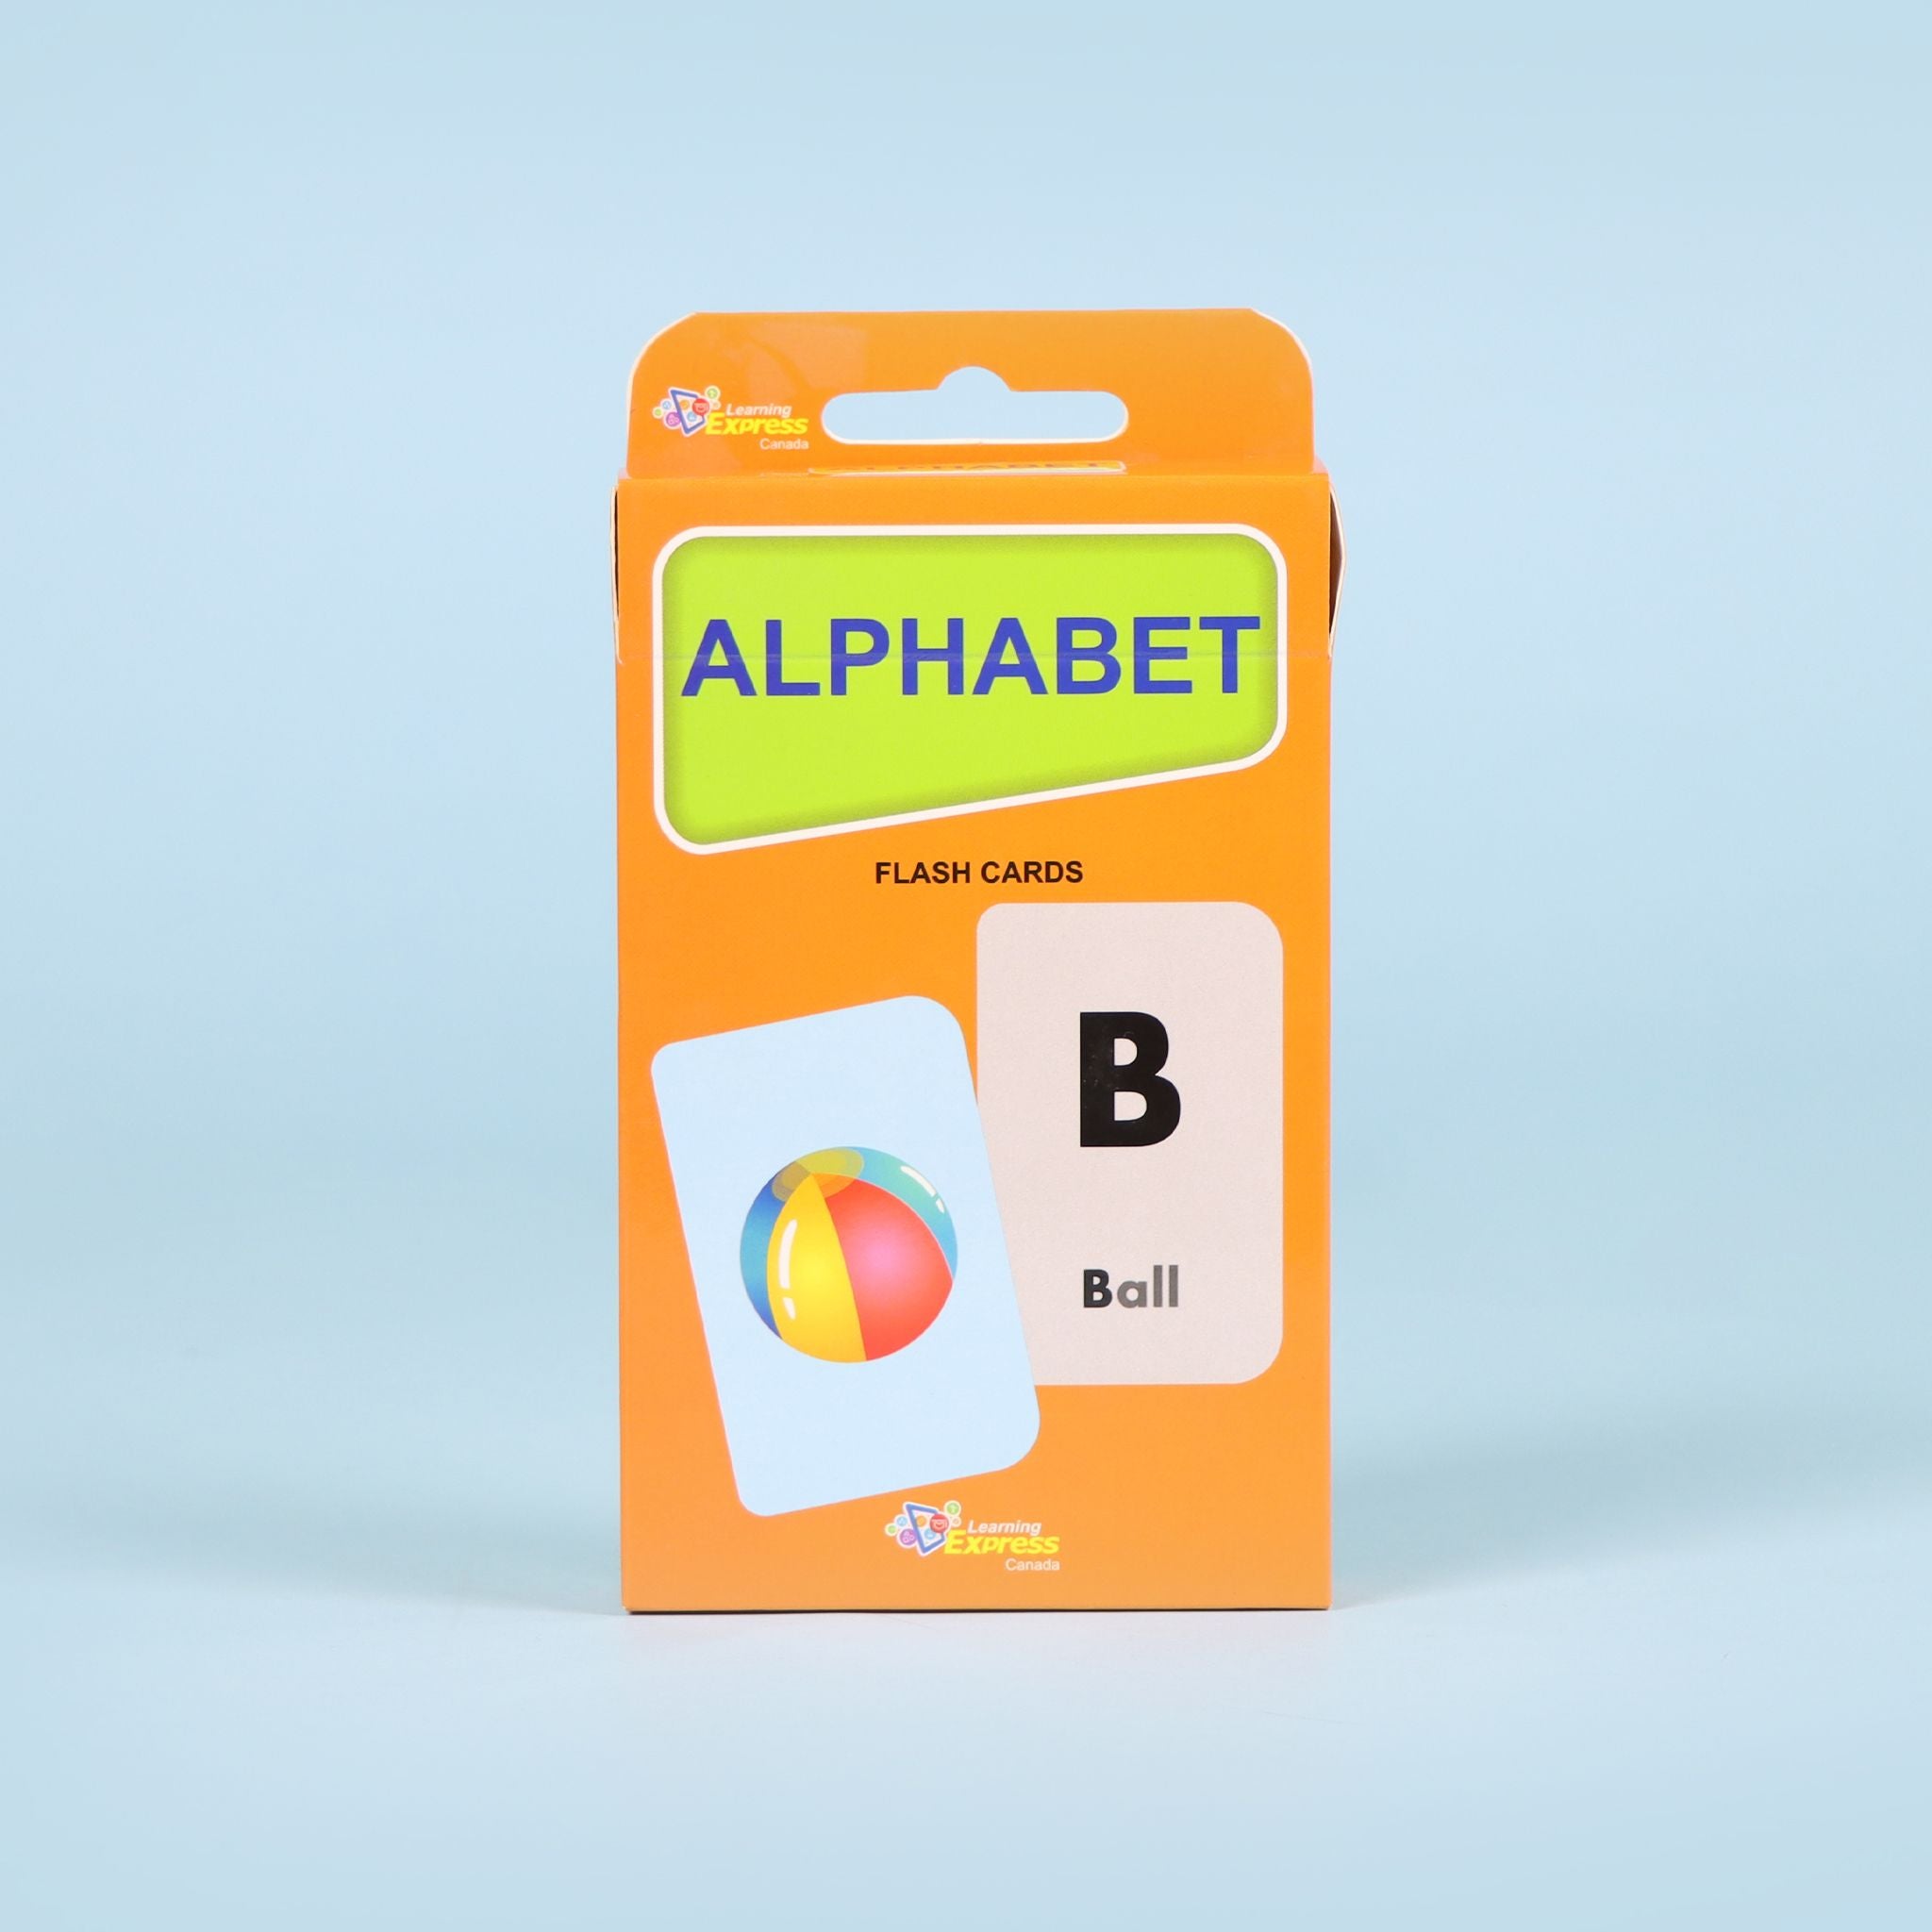 Learning express: Kids Cards (Alphabet)